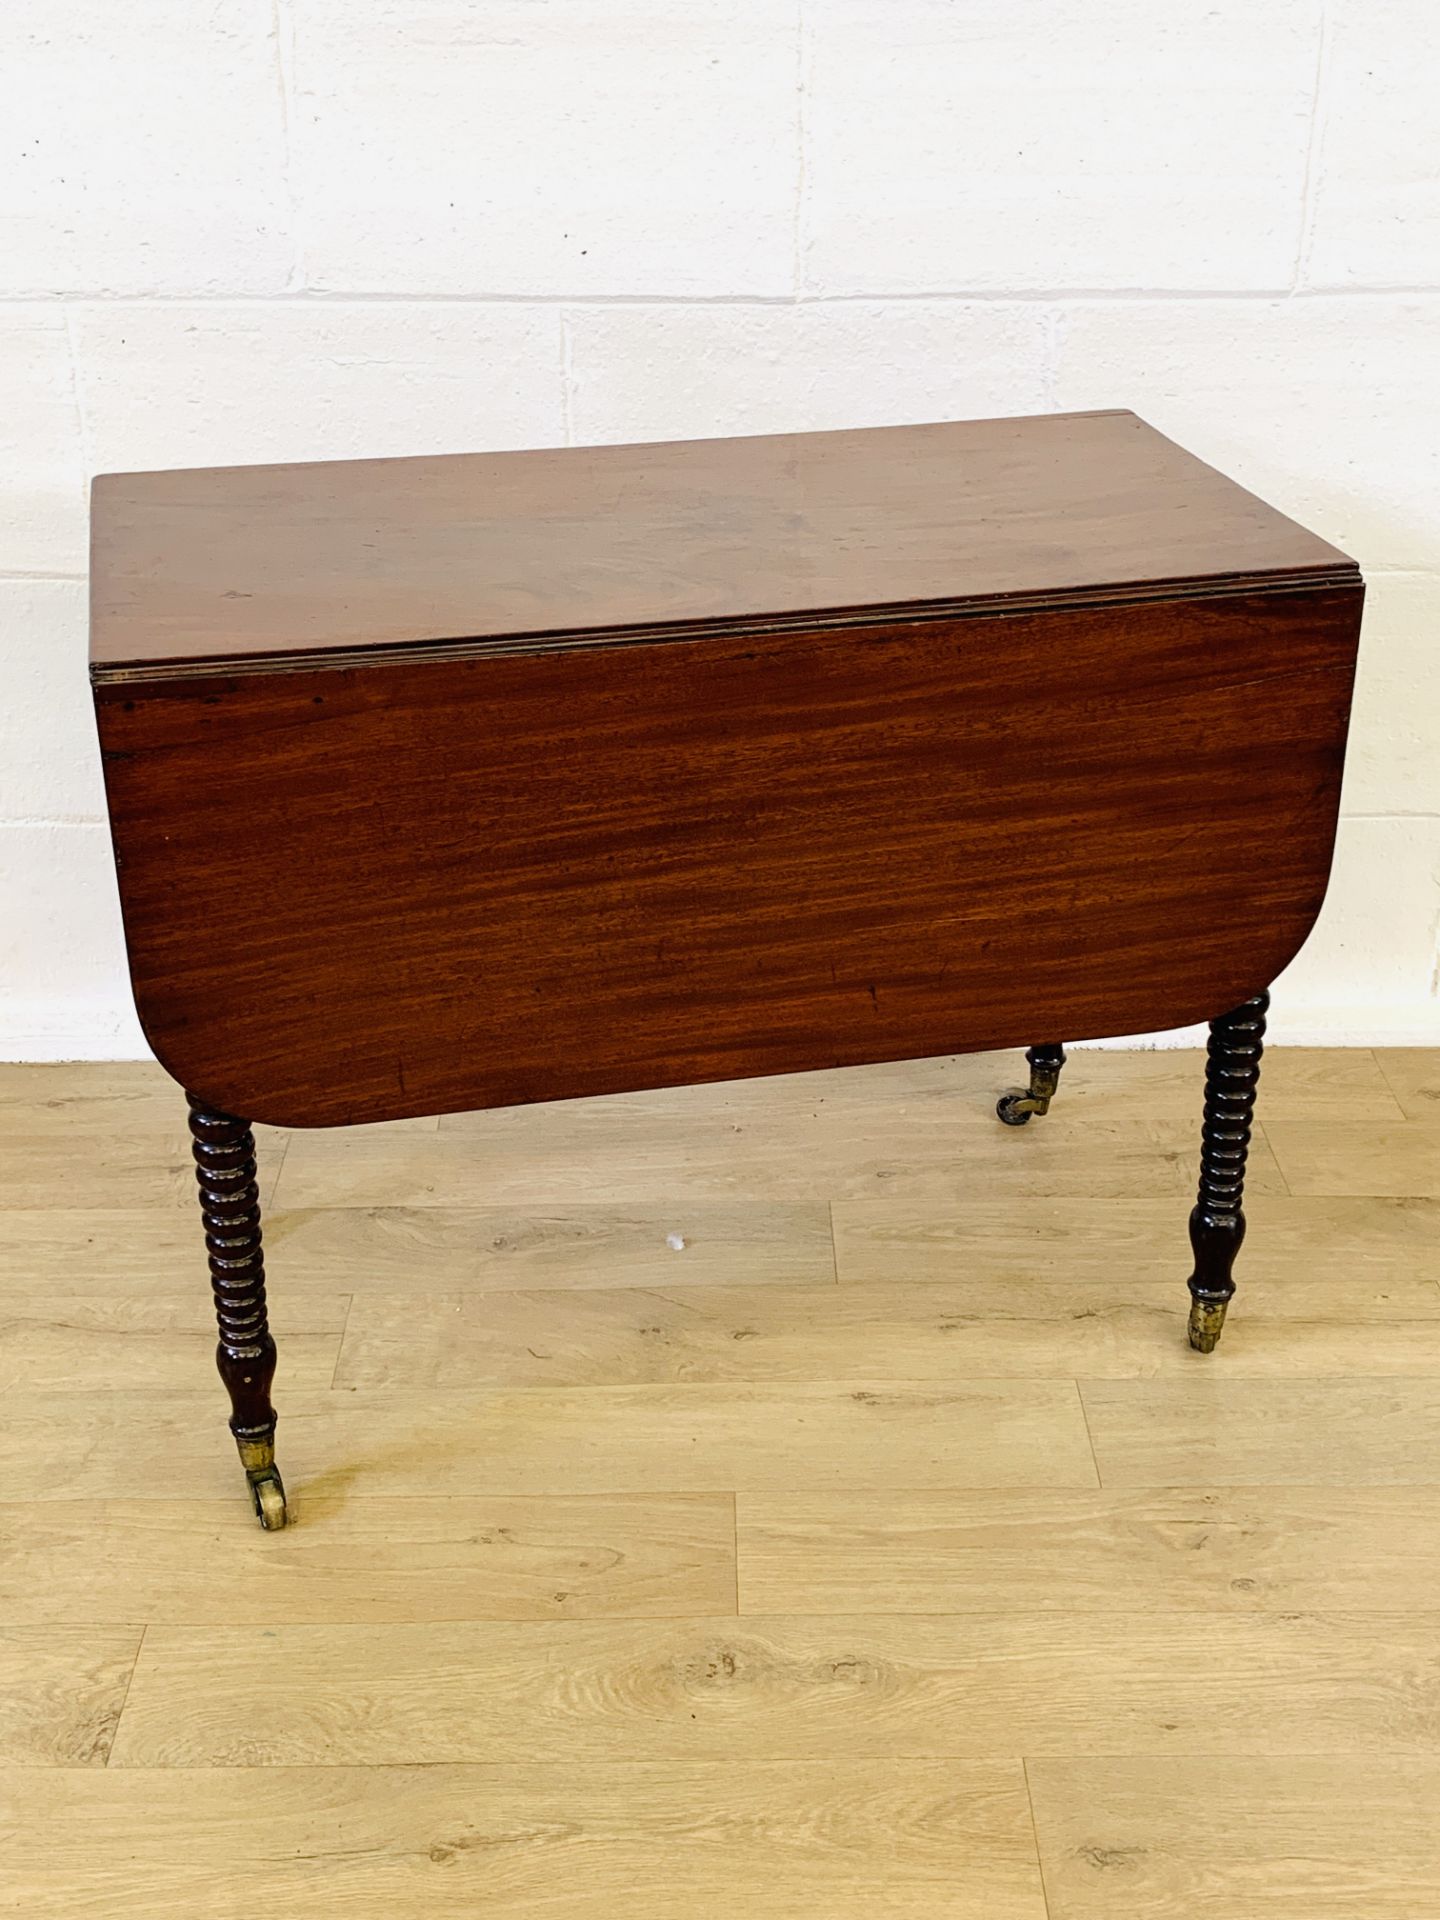 Mahogany drop side table with side drawer